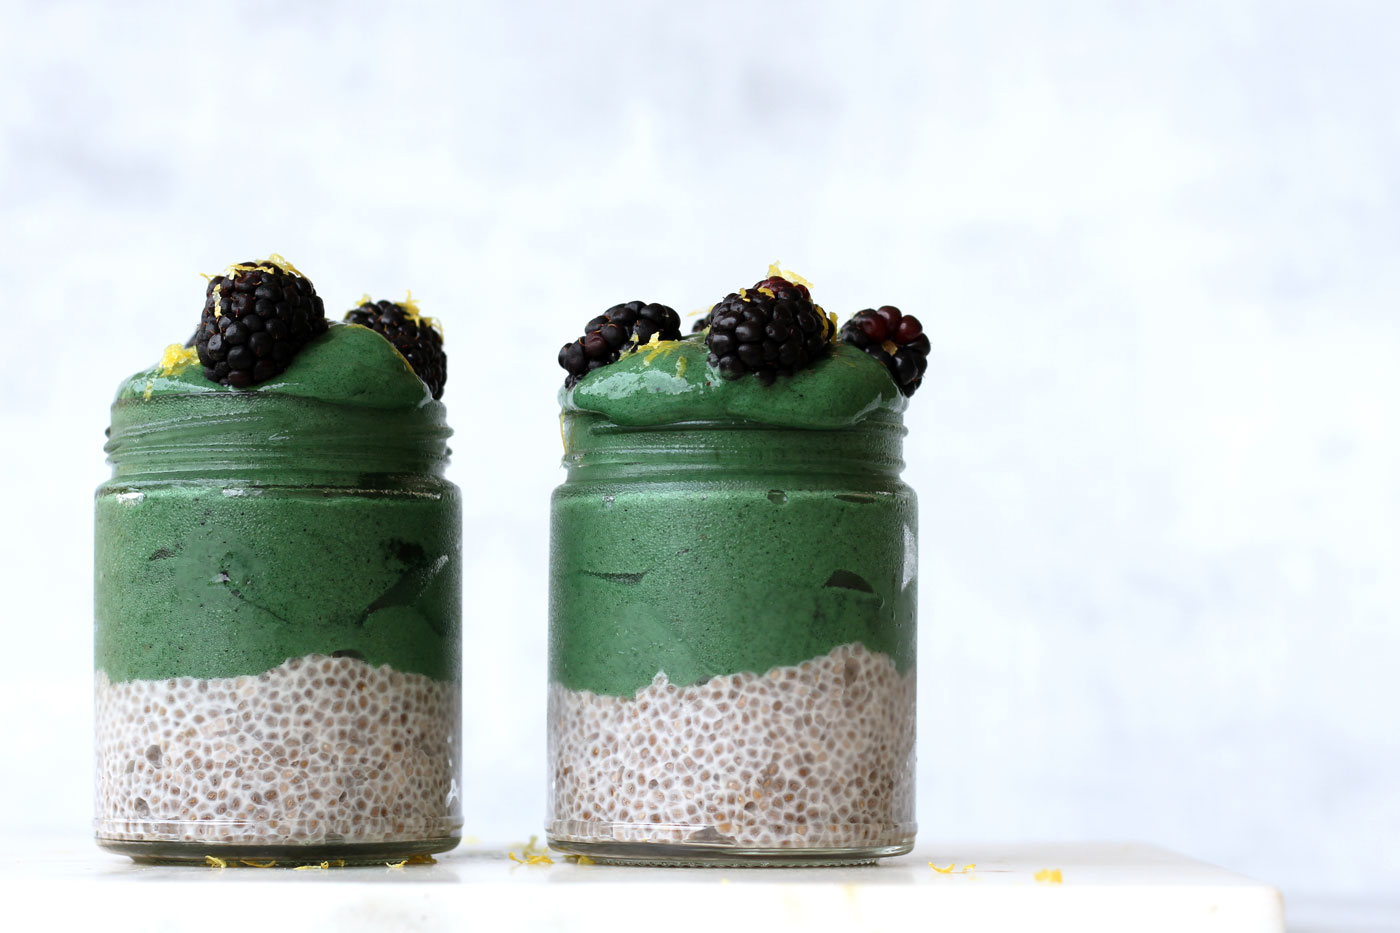 This is a superfood ice cream parfait recipe made by Active Vegetarian